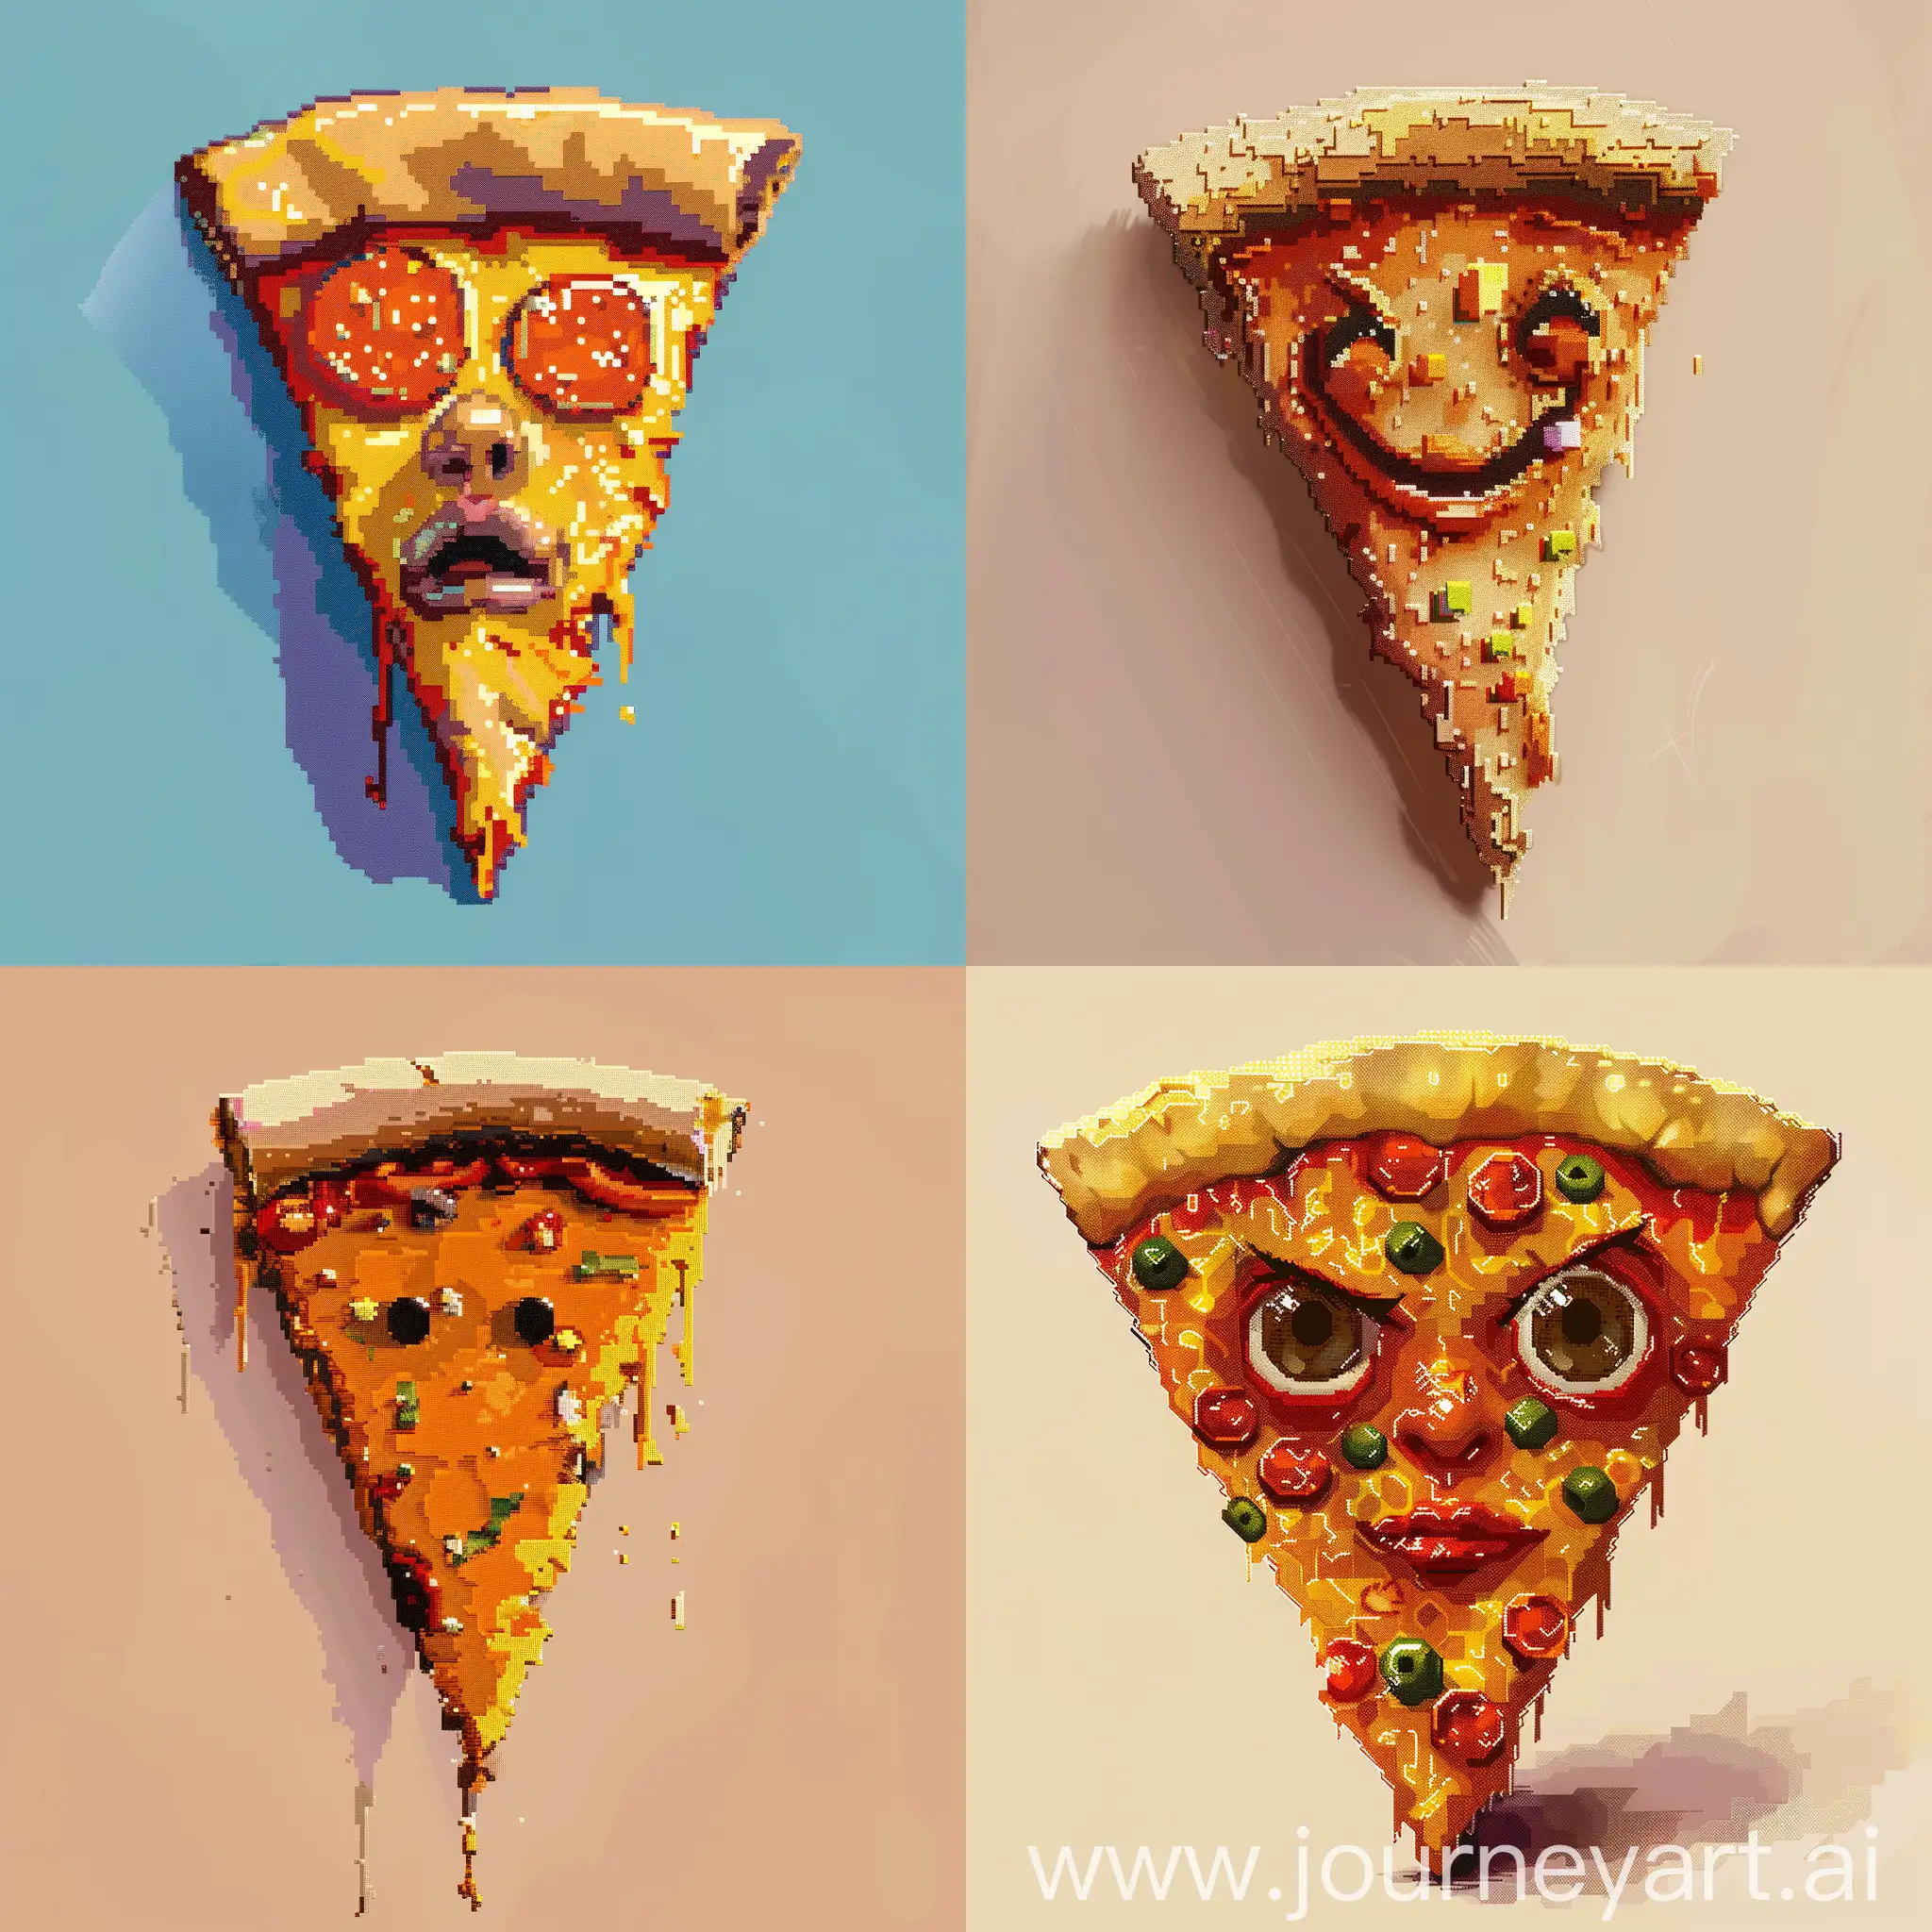 Cheerful-Pixel-Art-Pizza-Slice-with-Face